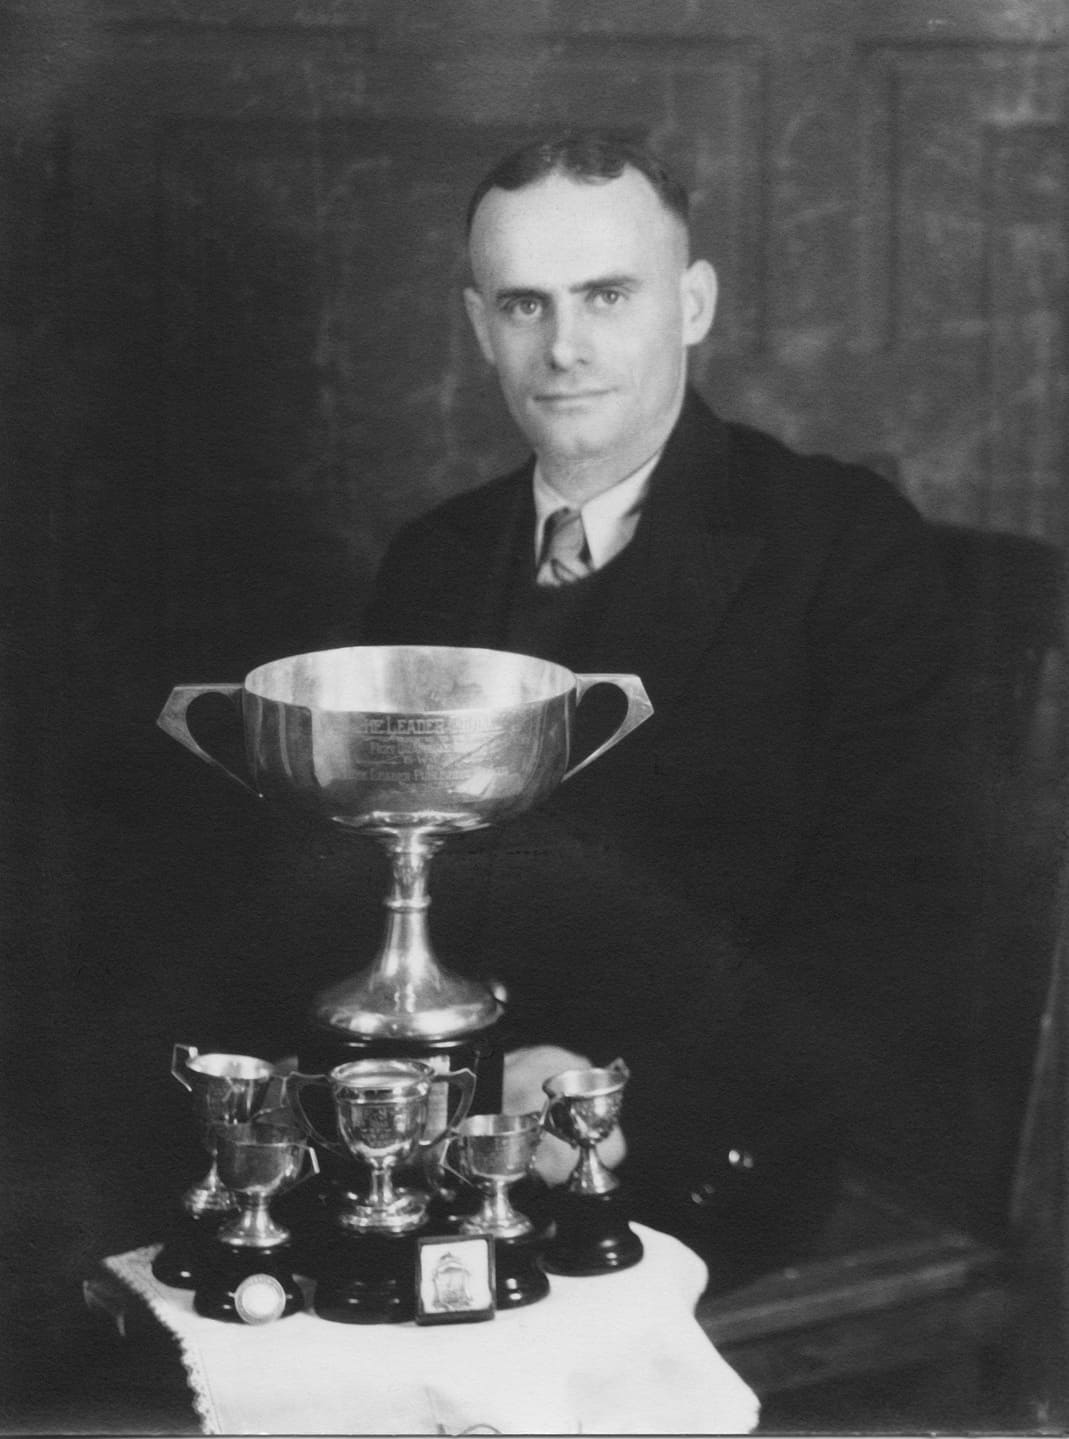 John Wendell with trophies - honey is the ideal energy source for athletes